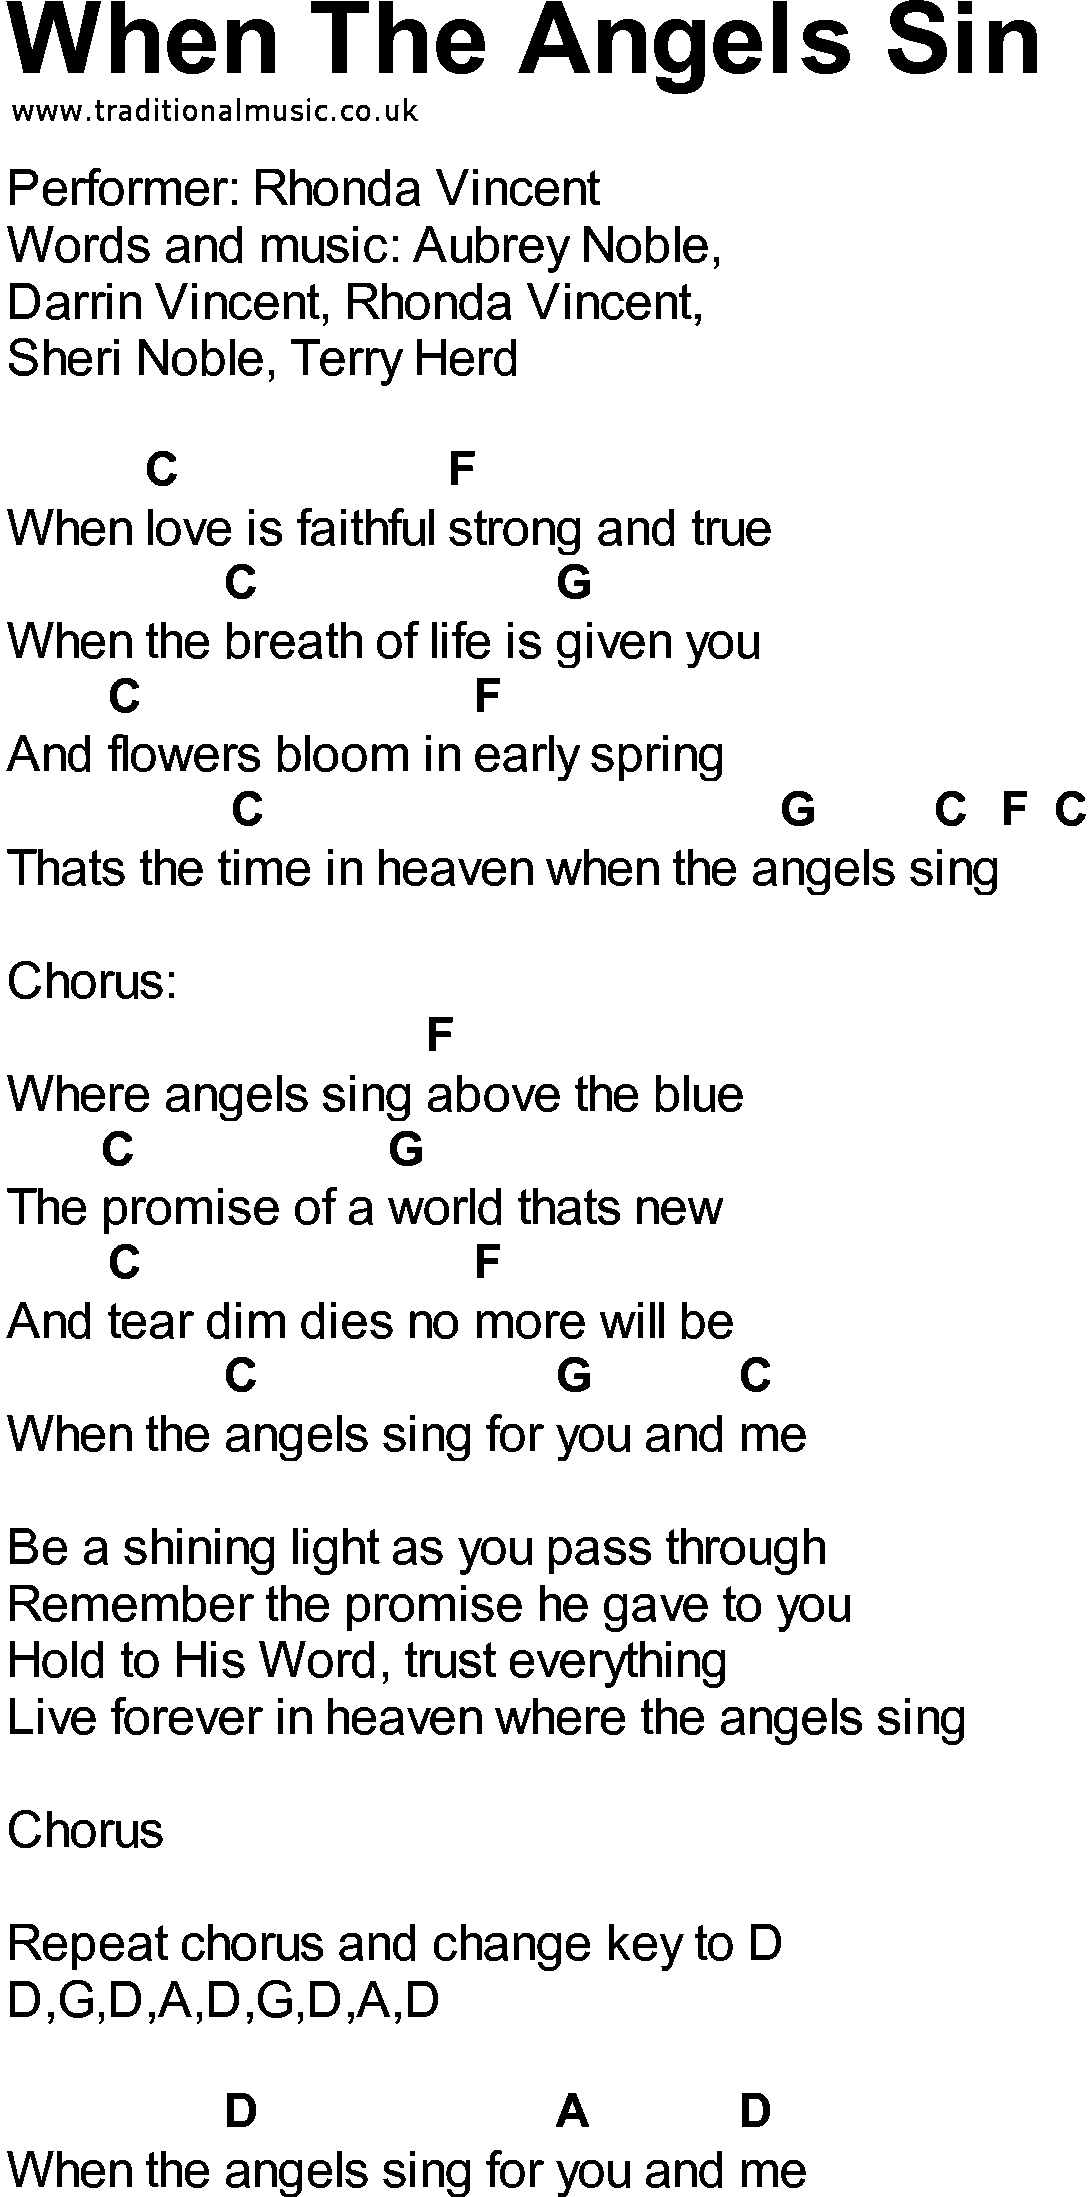 Bluegrass songs with chords - When The Angels Sin